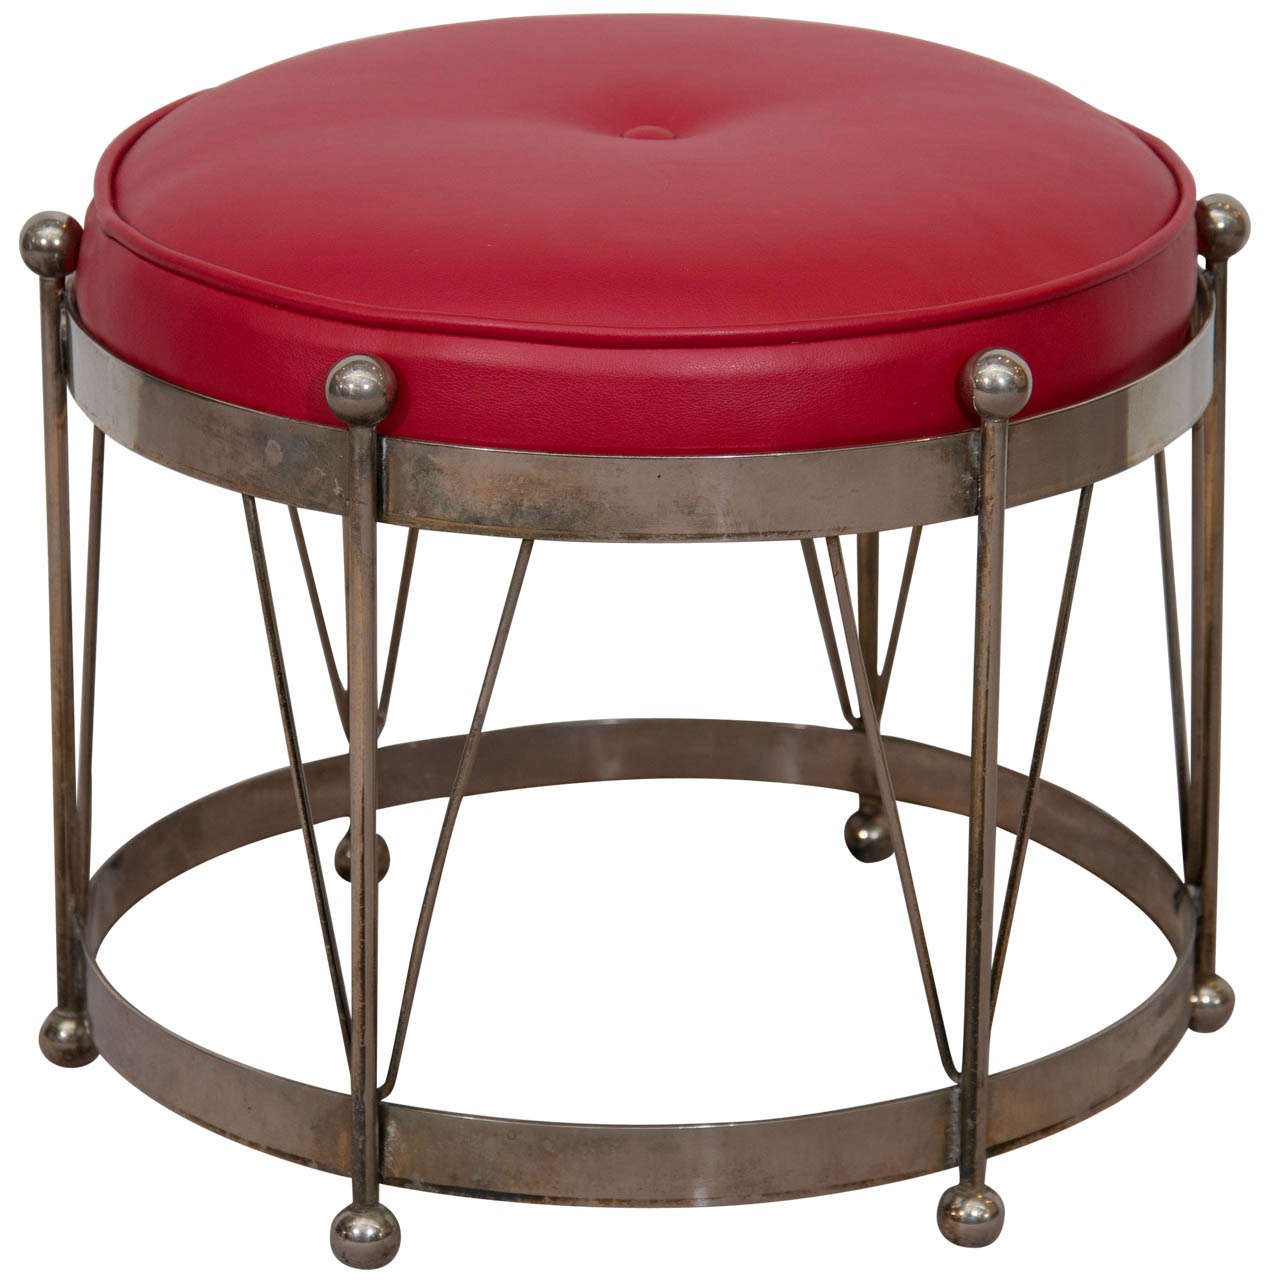 A Mid Century Chrome Drum Bench With Red Leather Upholstery